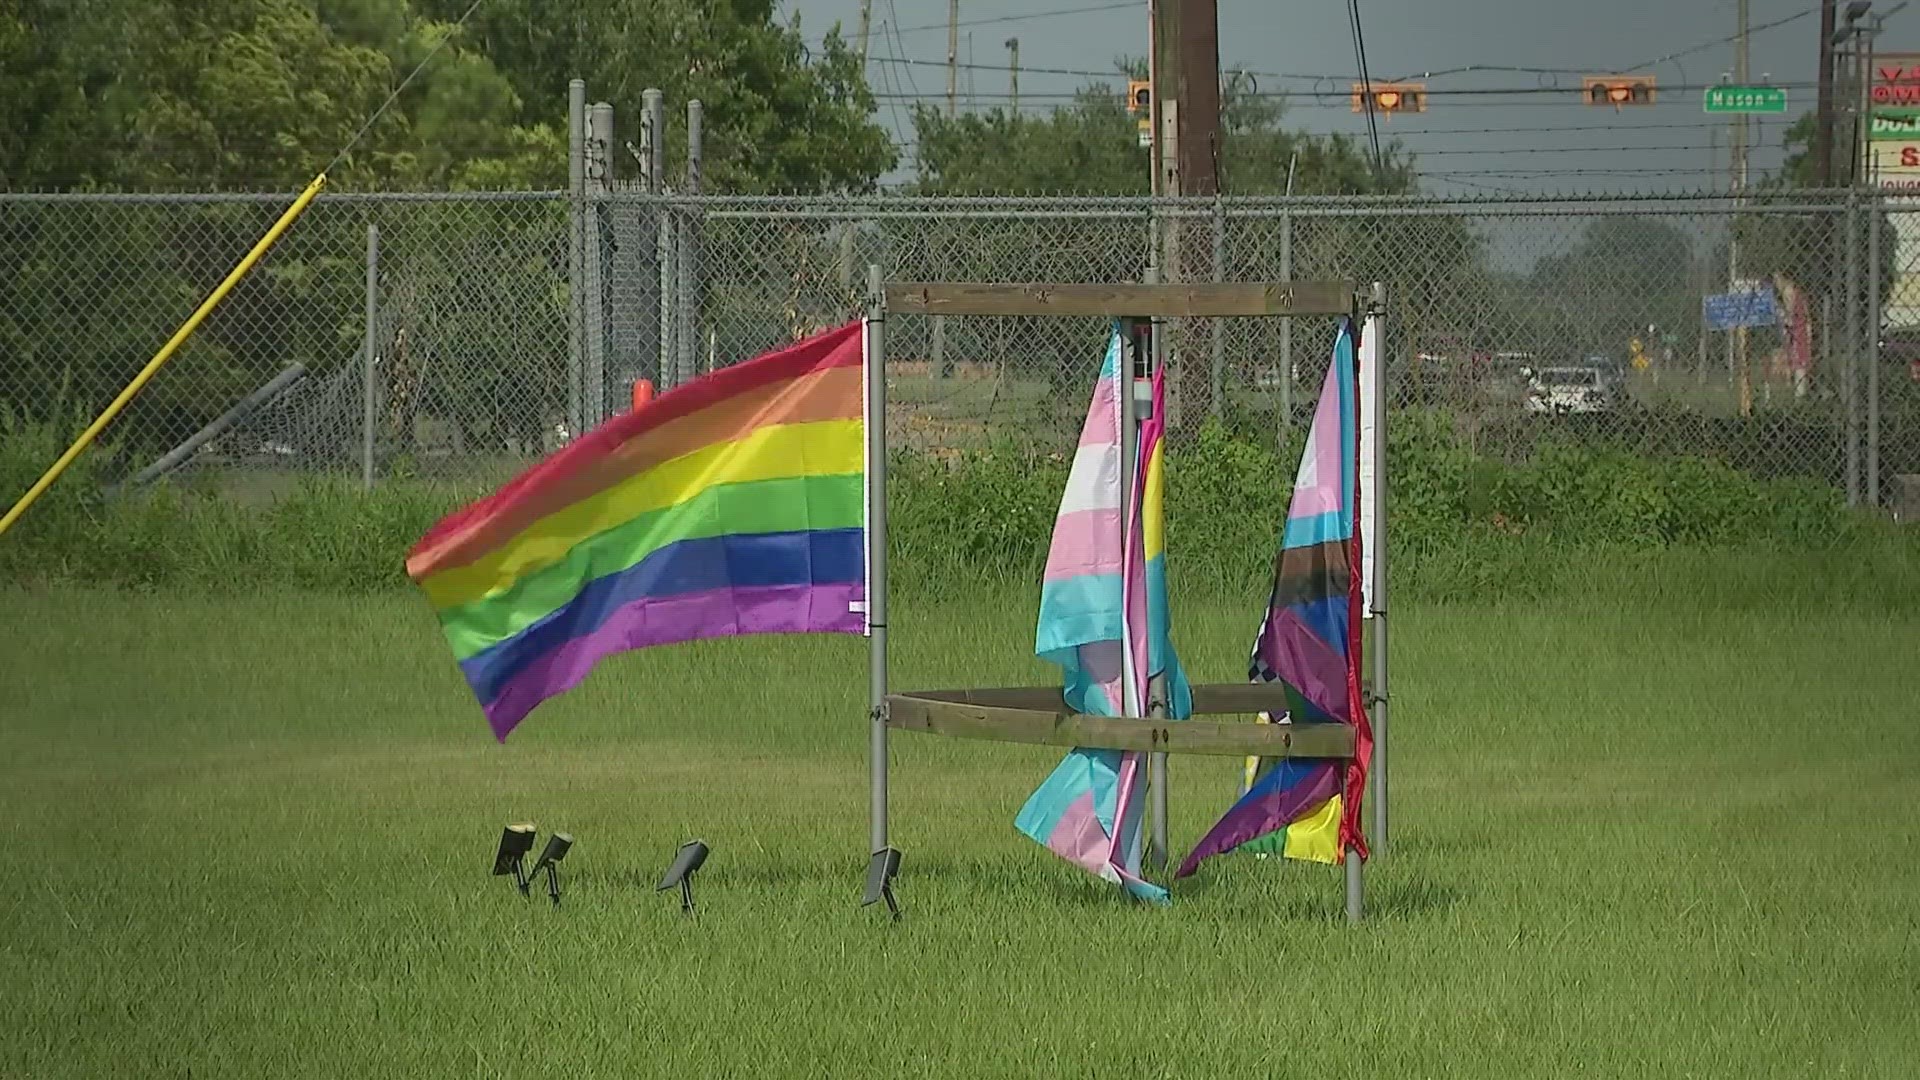 A church in Katy proudly displays Pride flags to celebrate the LGBTQ community and their right to equality.